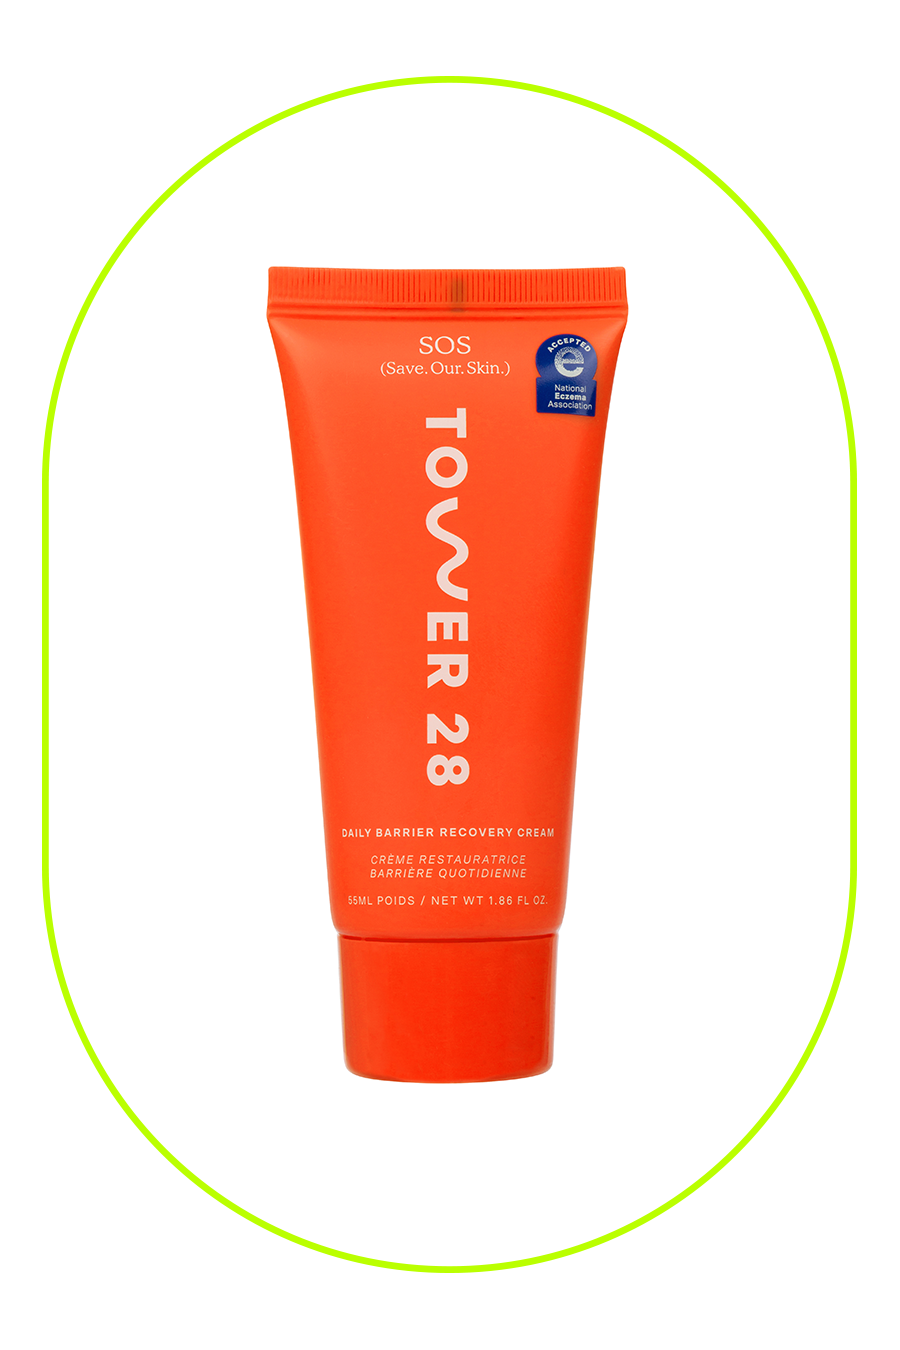 SOS Daily Barrier Recovery Cream